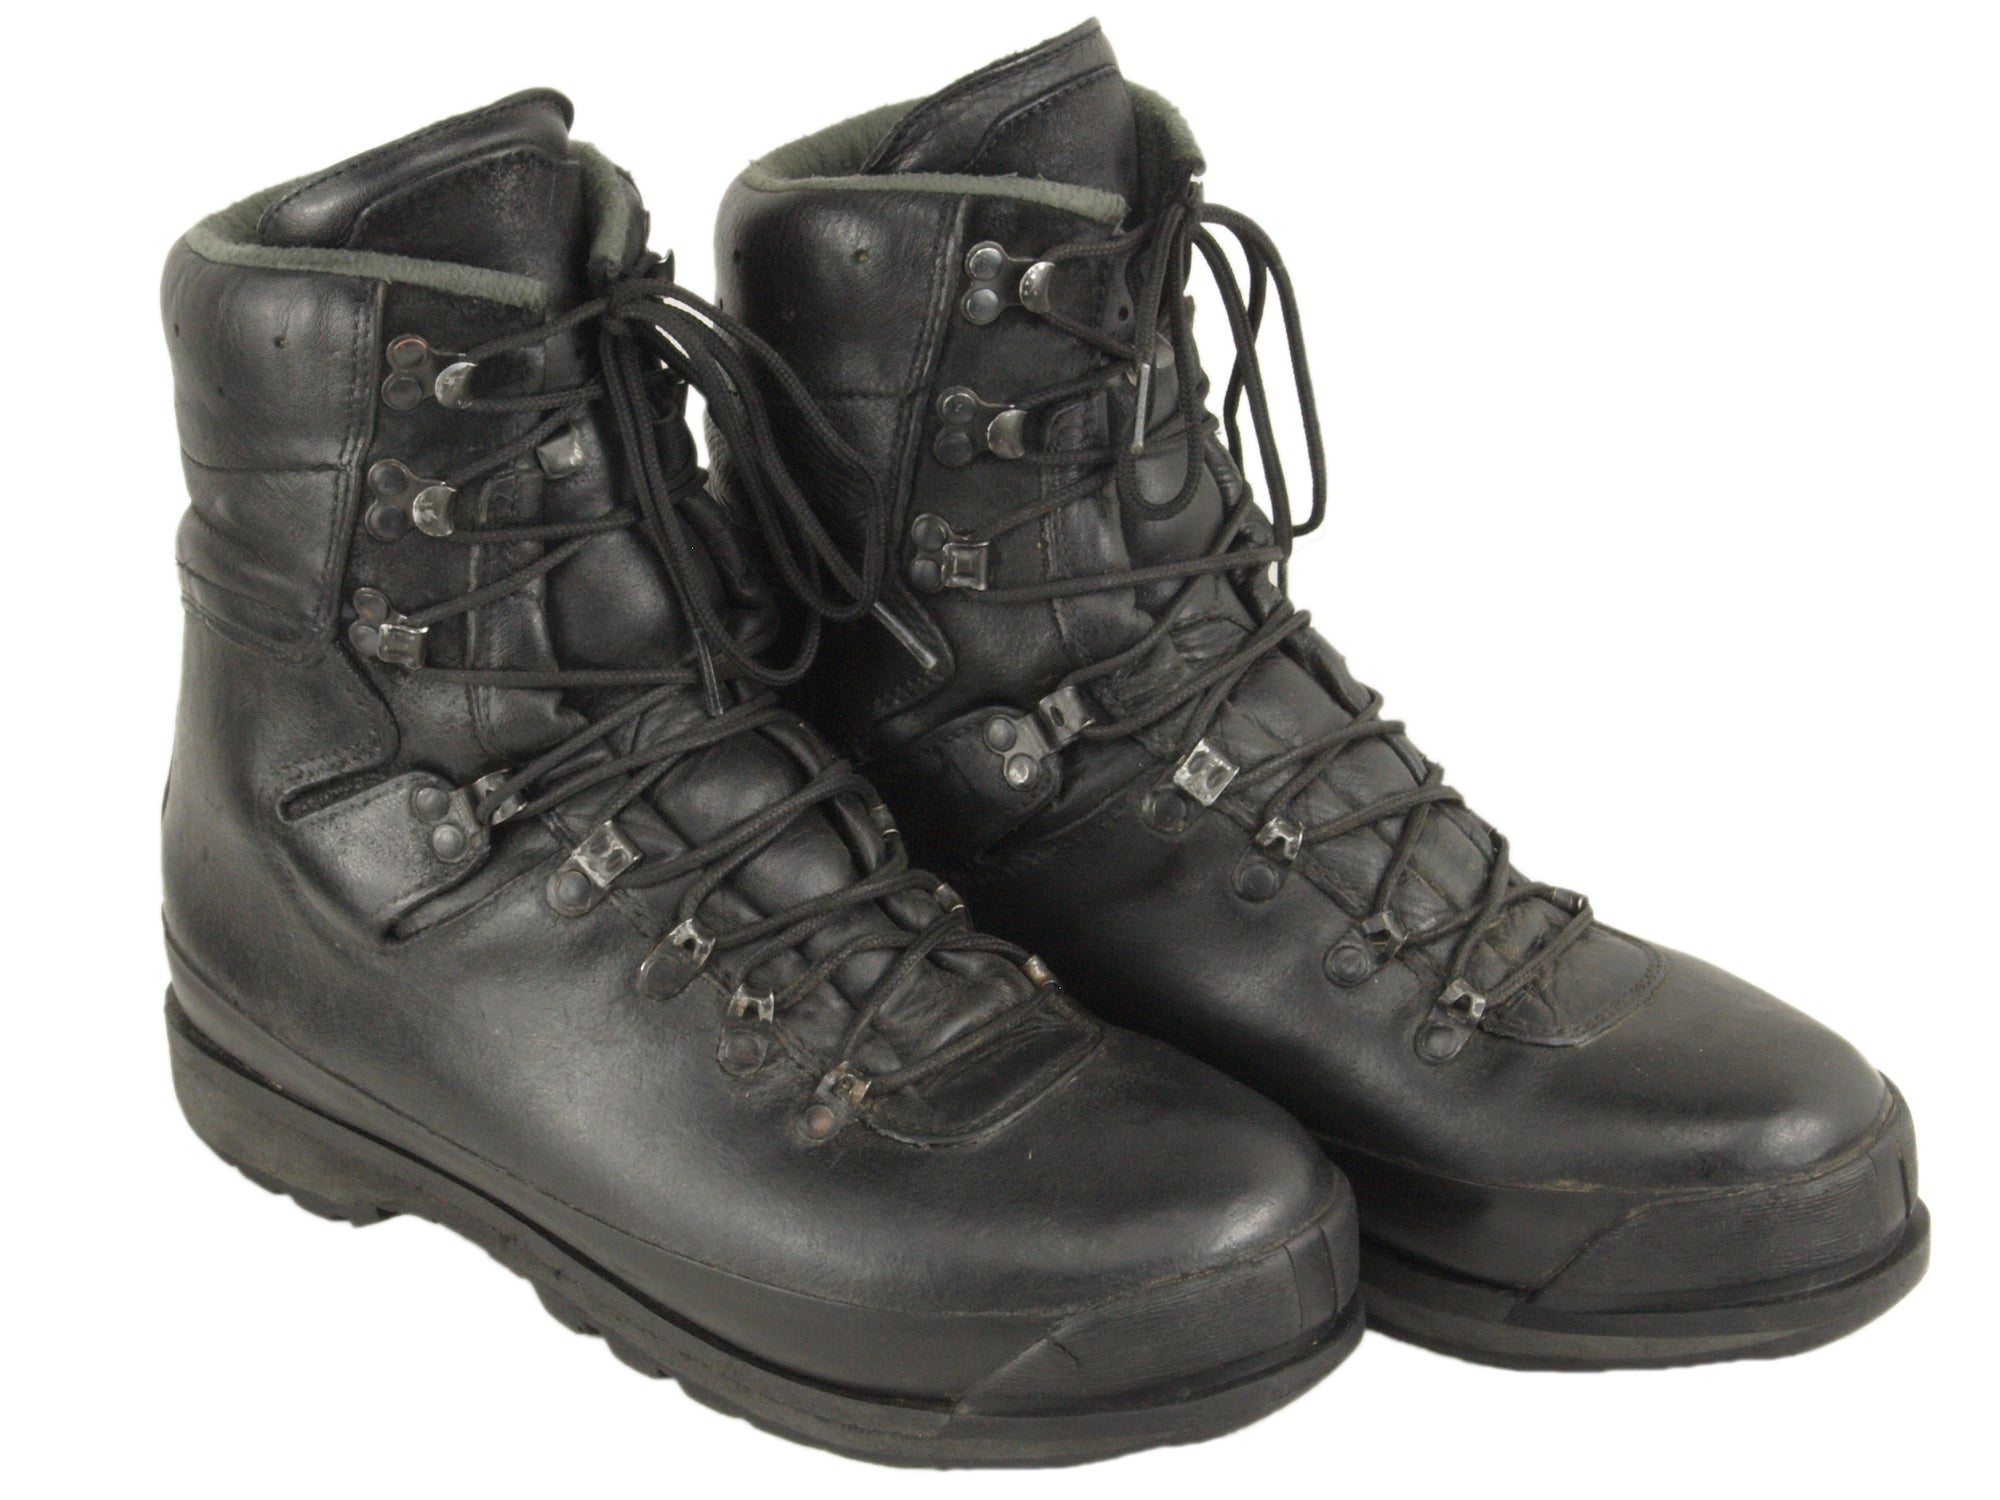 Austrian Army Mountain Boots - breathable membrane lined